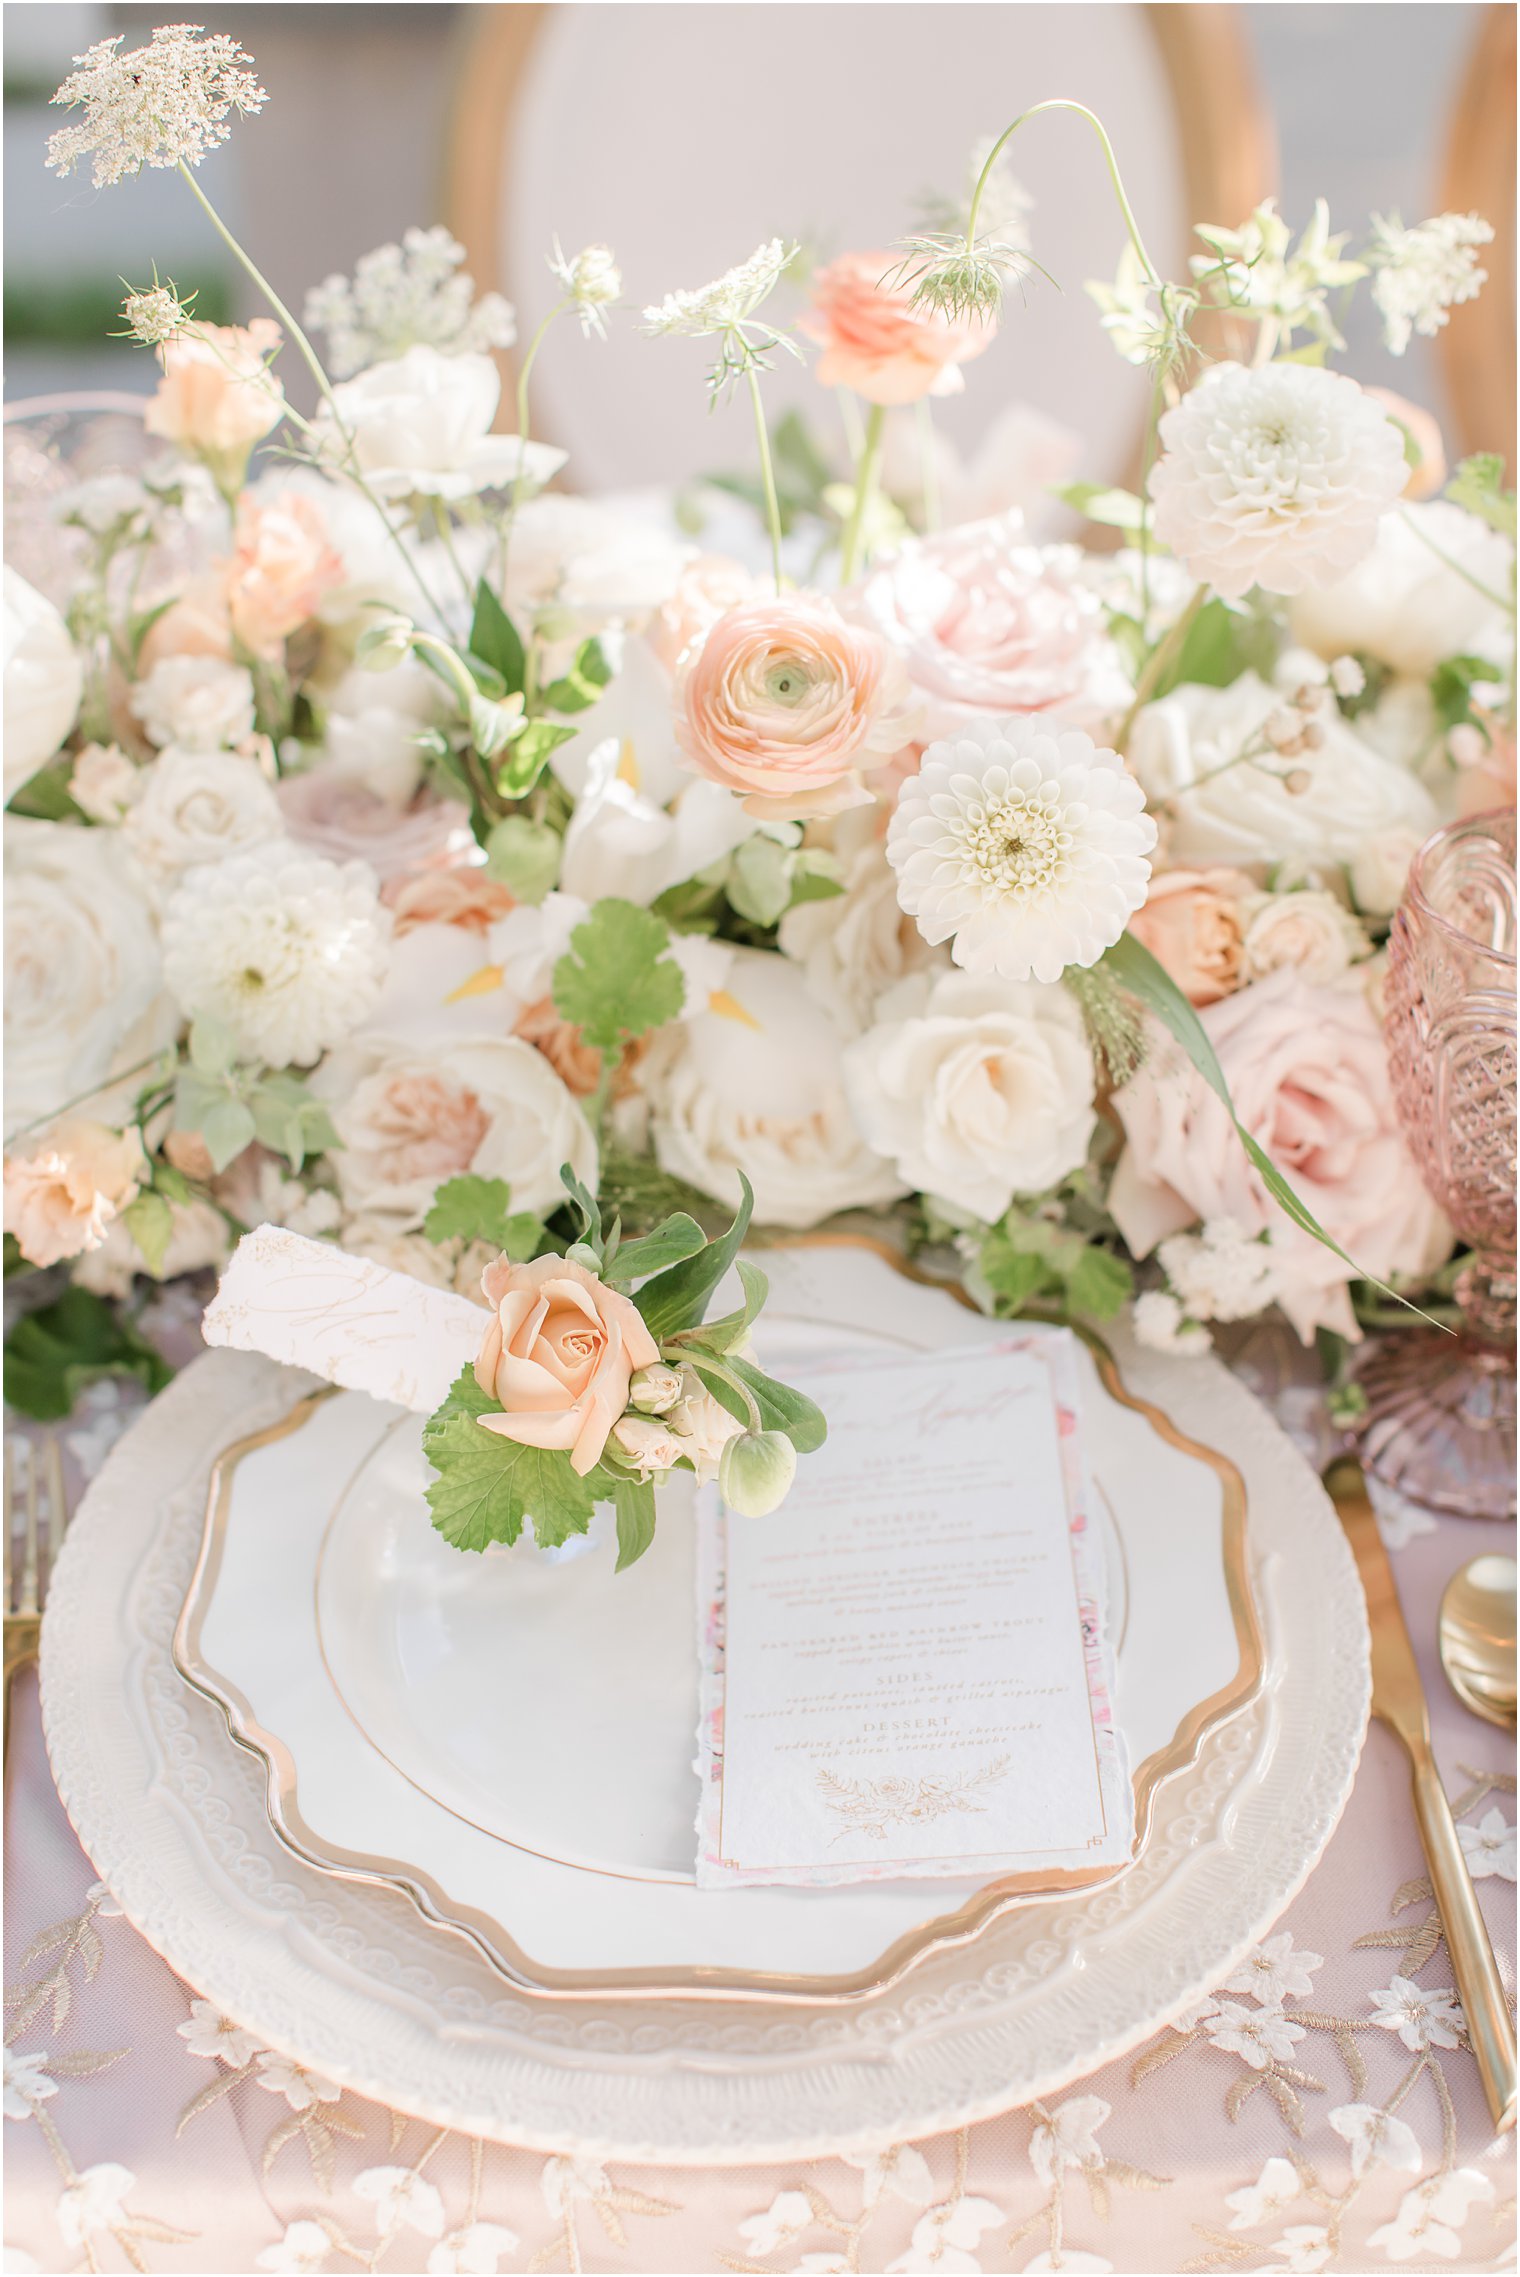 Tablescape rentals by Lovely Luxe Rentals at Park Chateau Estate and Gardens in East Brunswick, NJ